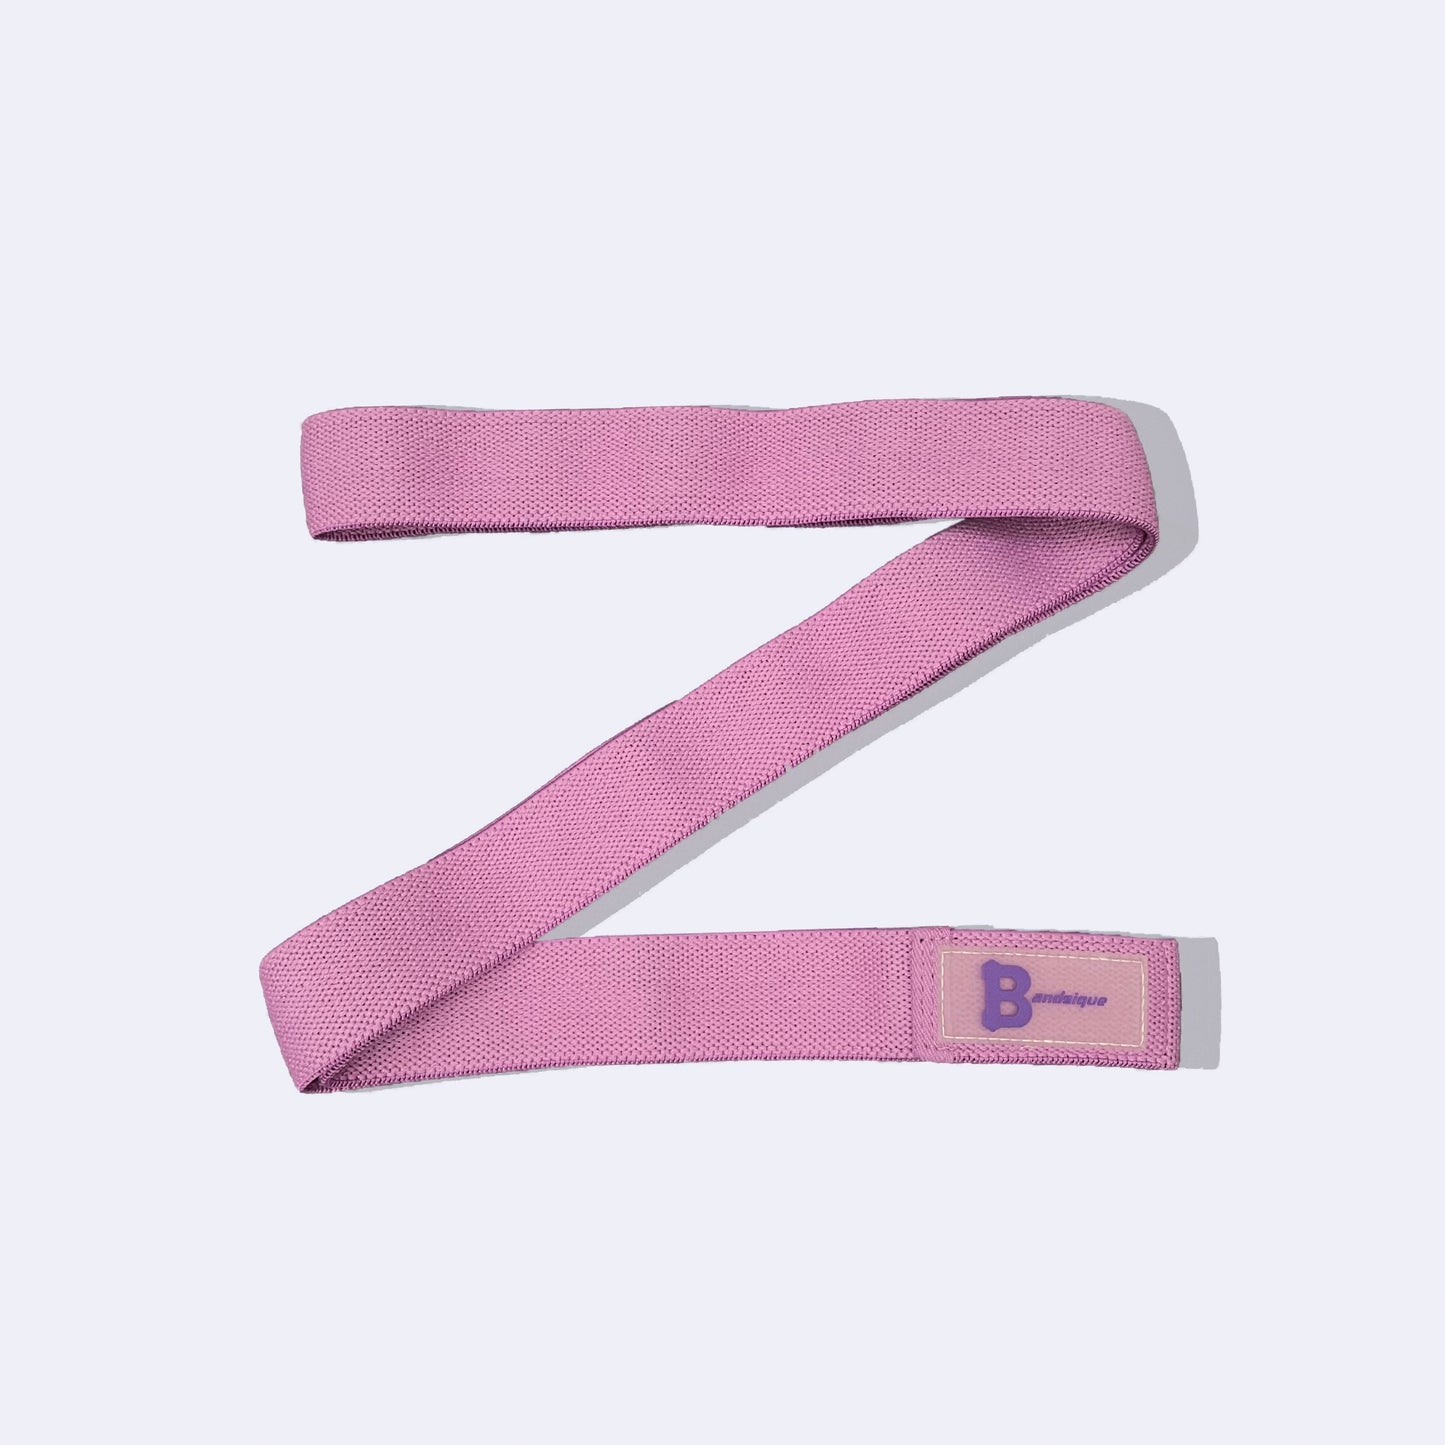 Long pink resistance band